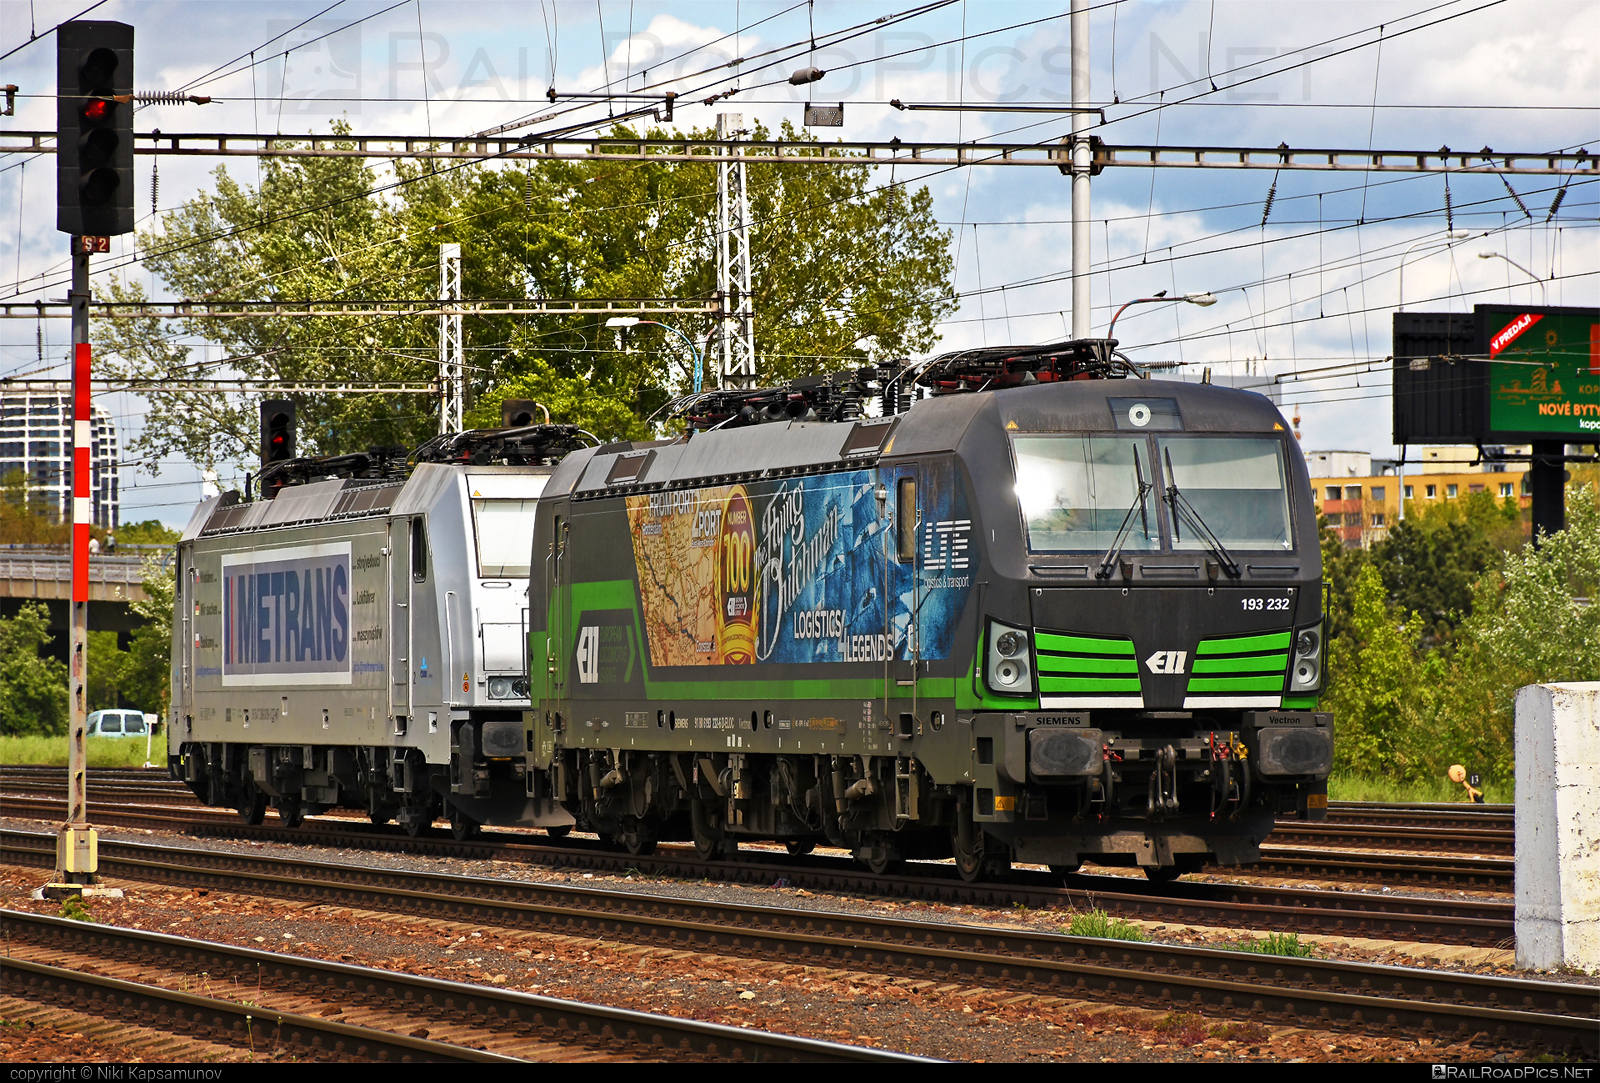 Siemens Vectron MS - 193 232 operated by LTE Logistik und Transport GmbH #ell #ellgermany #eloc #europeanlocomotiveleasing #lte #ltelogistikundtransport #ltelogistikundtransportgmbh #siemens #siemensvectron #siemensvectronms #vectron #vectronms